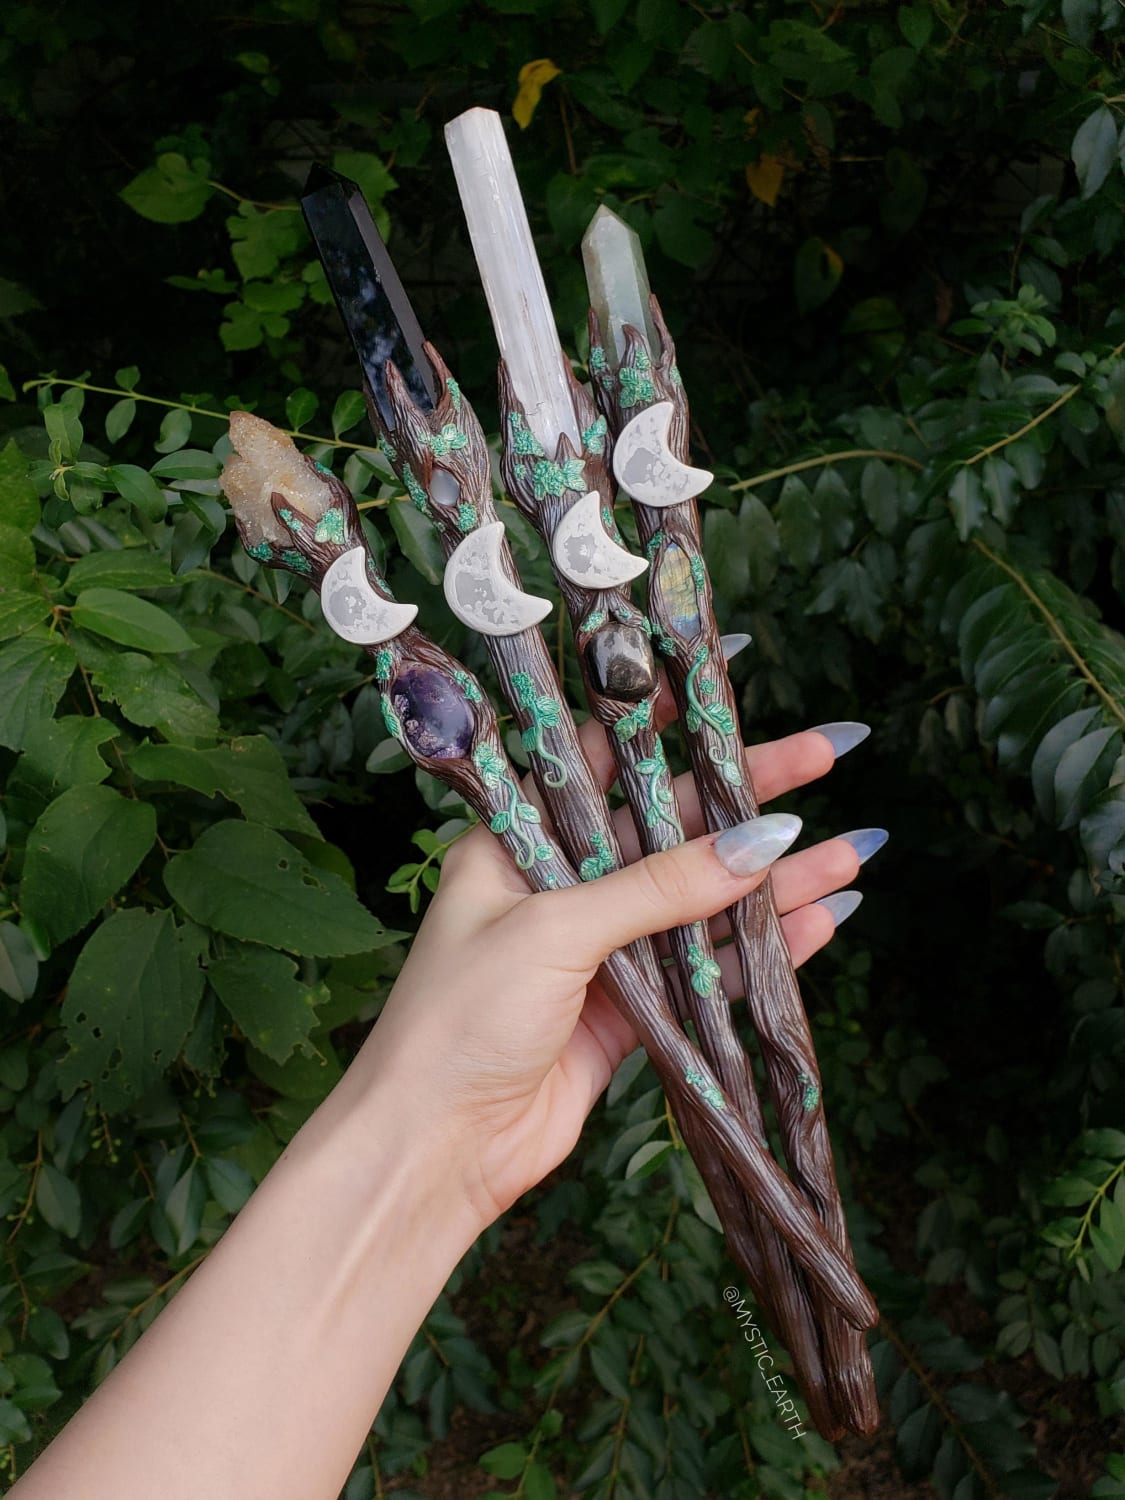 Some of my recent sculpted wands with genuine crystals